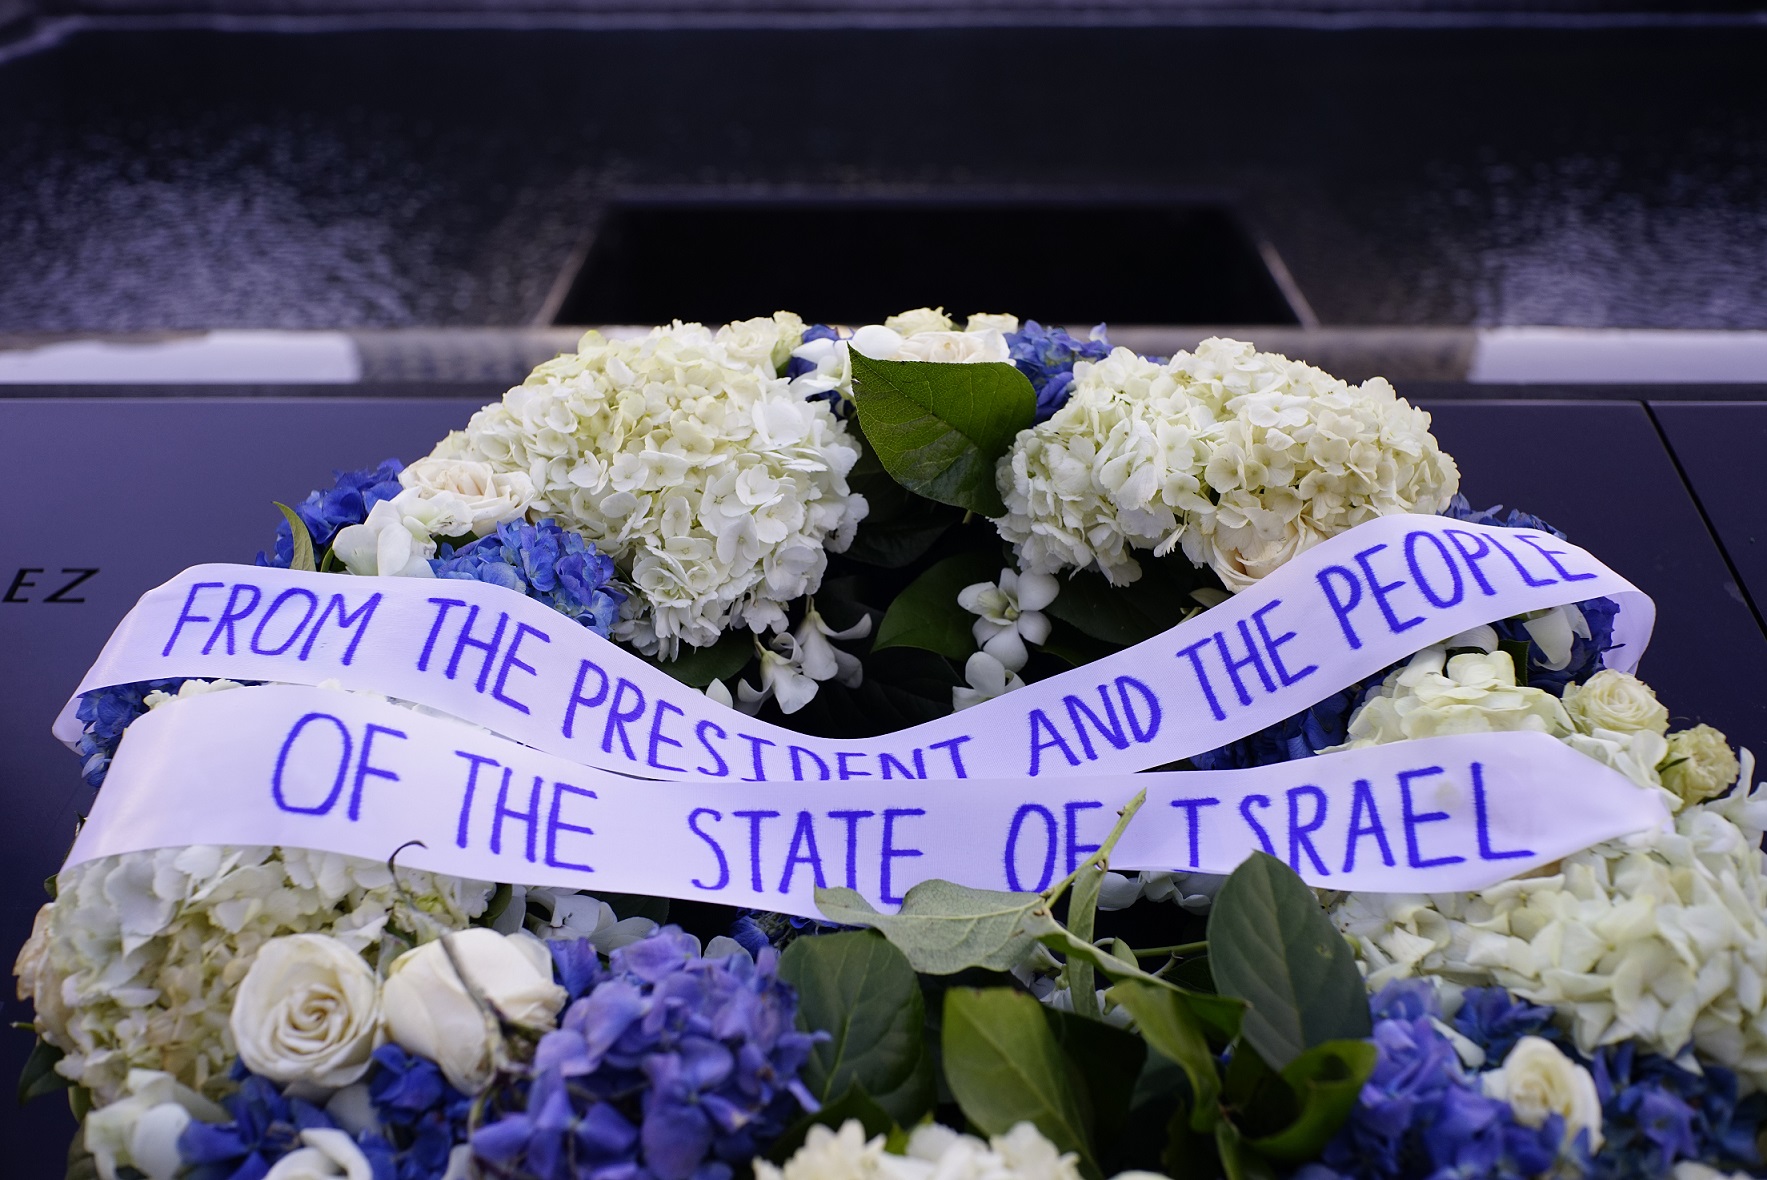 A wreath left at the 9/11 Memorial by Israeli President Reuven Rivlin includes white and blue flowers and the message “From the president and the people of the state of Israel.”